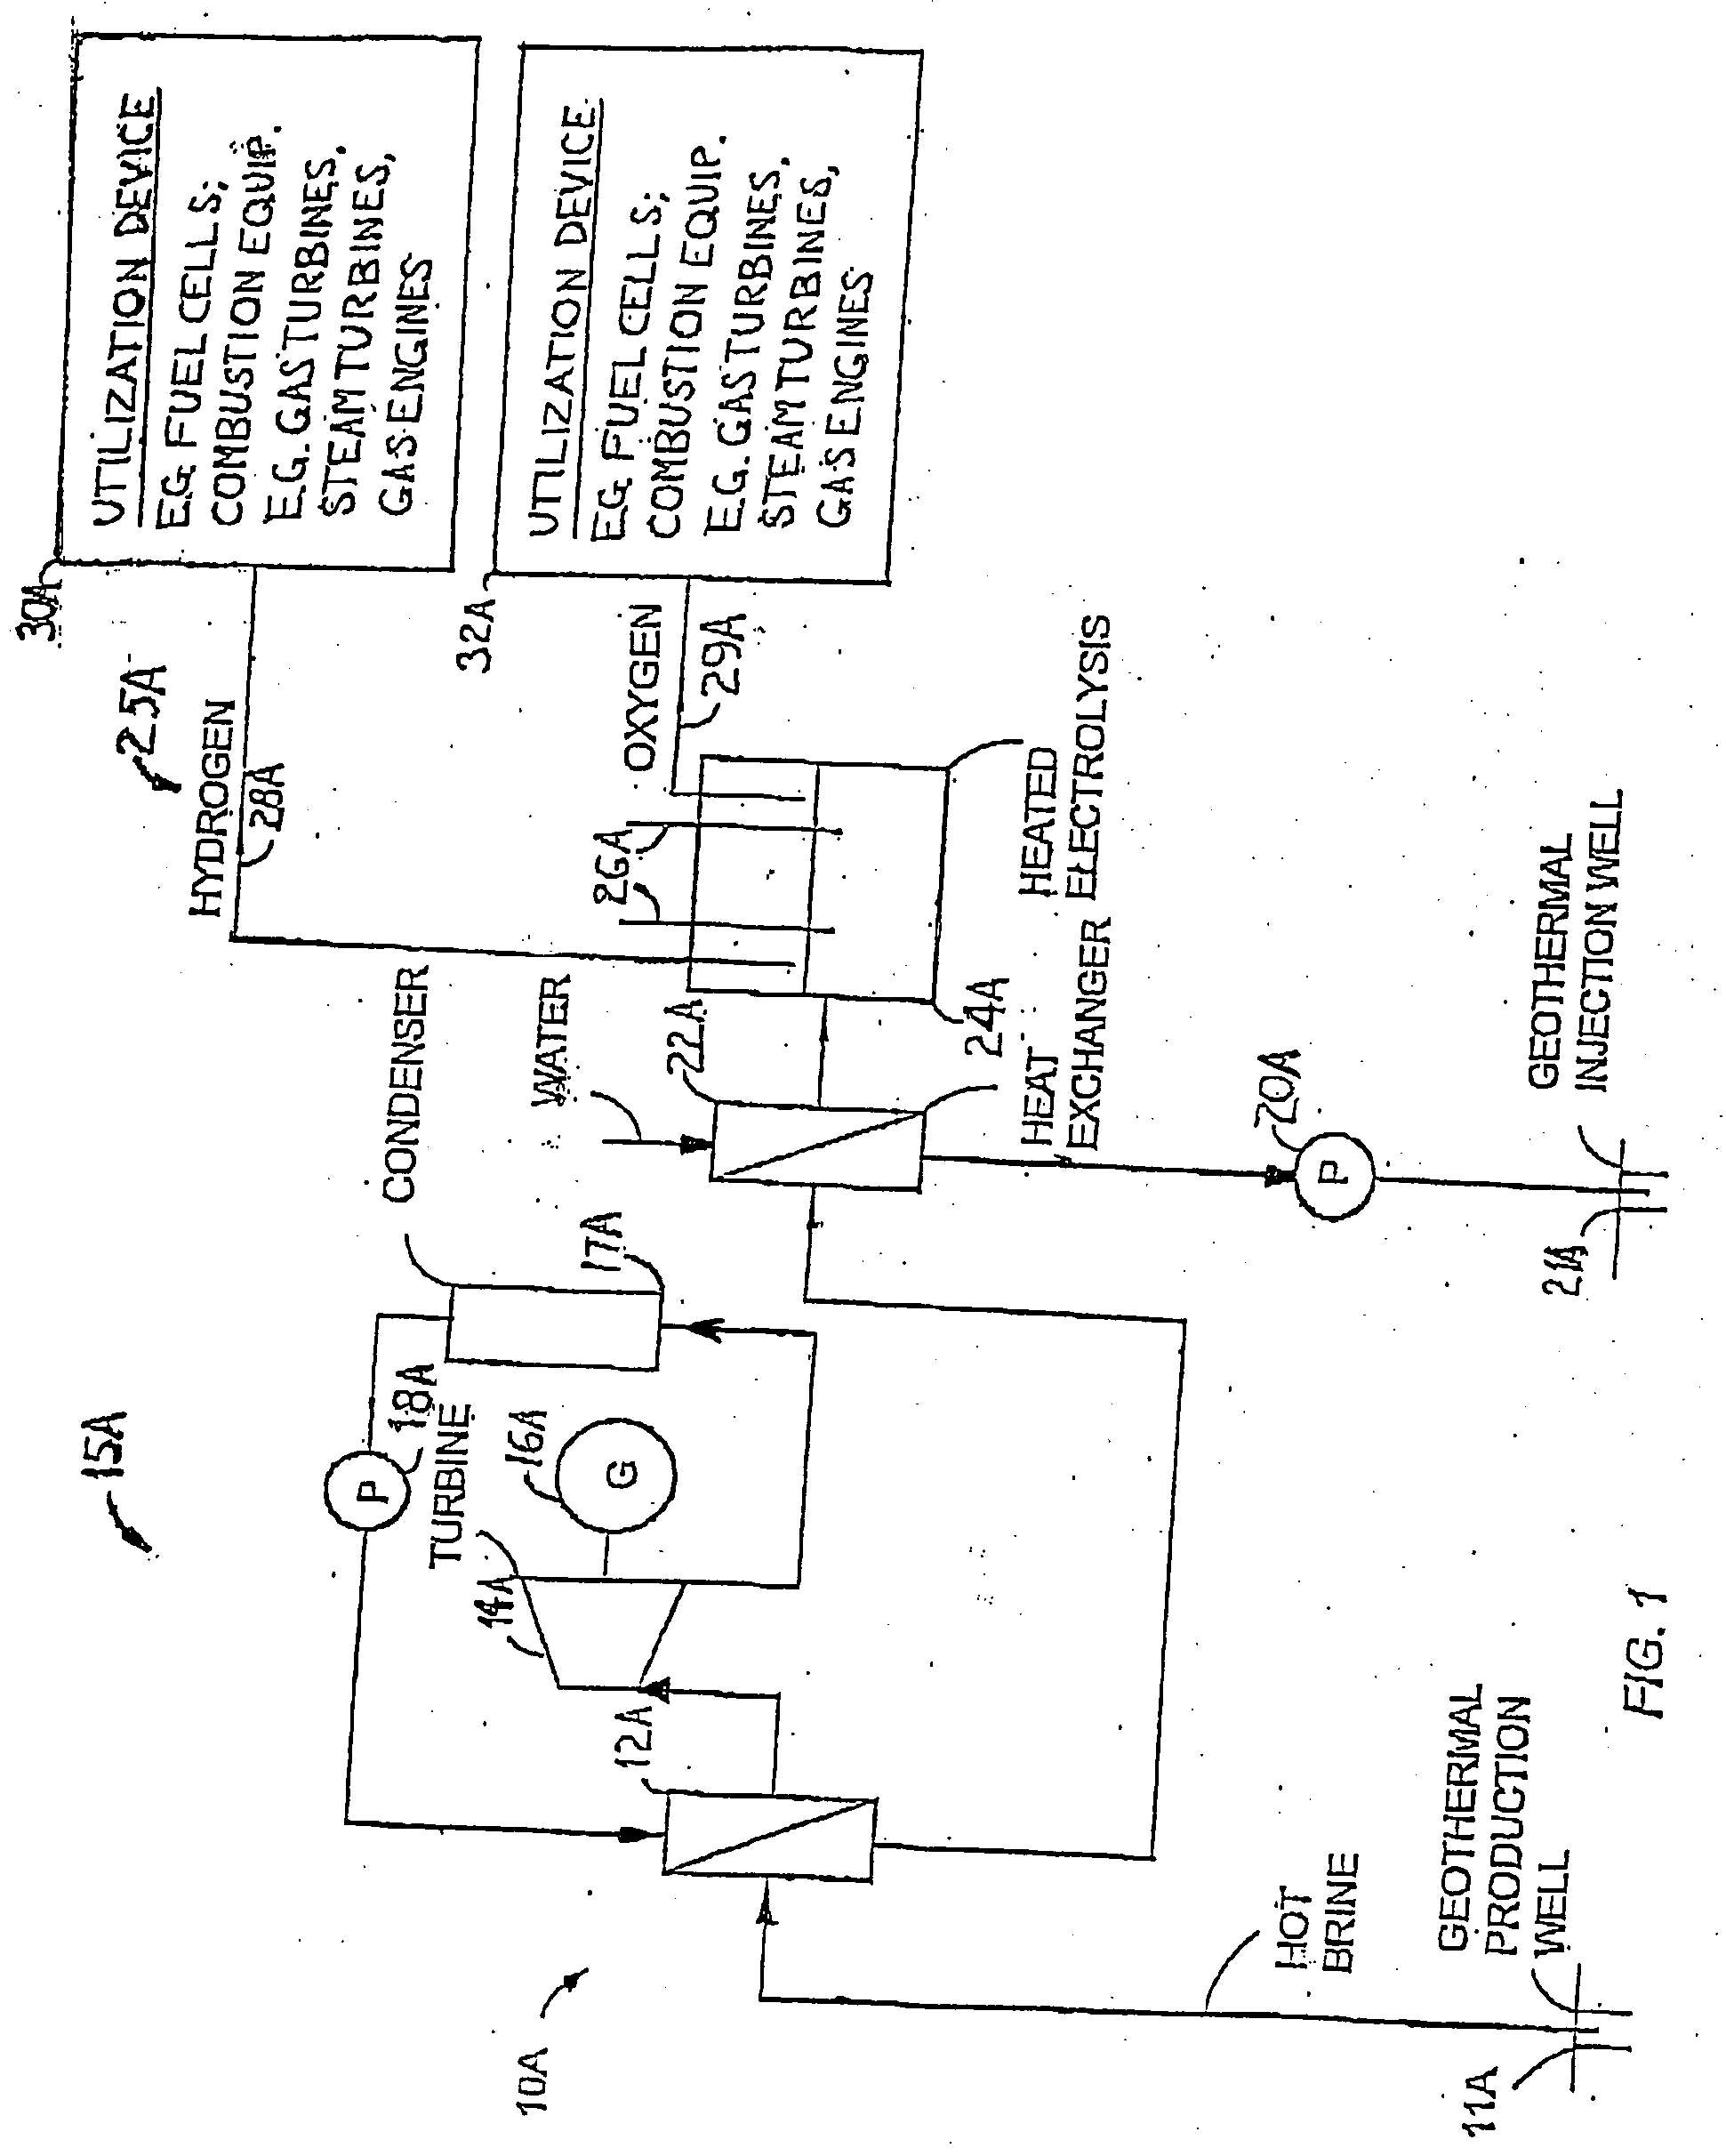 Method of and apparatus for producing hydrogen using geothermal energy